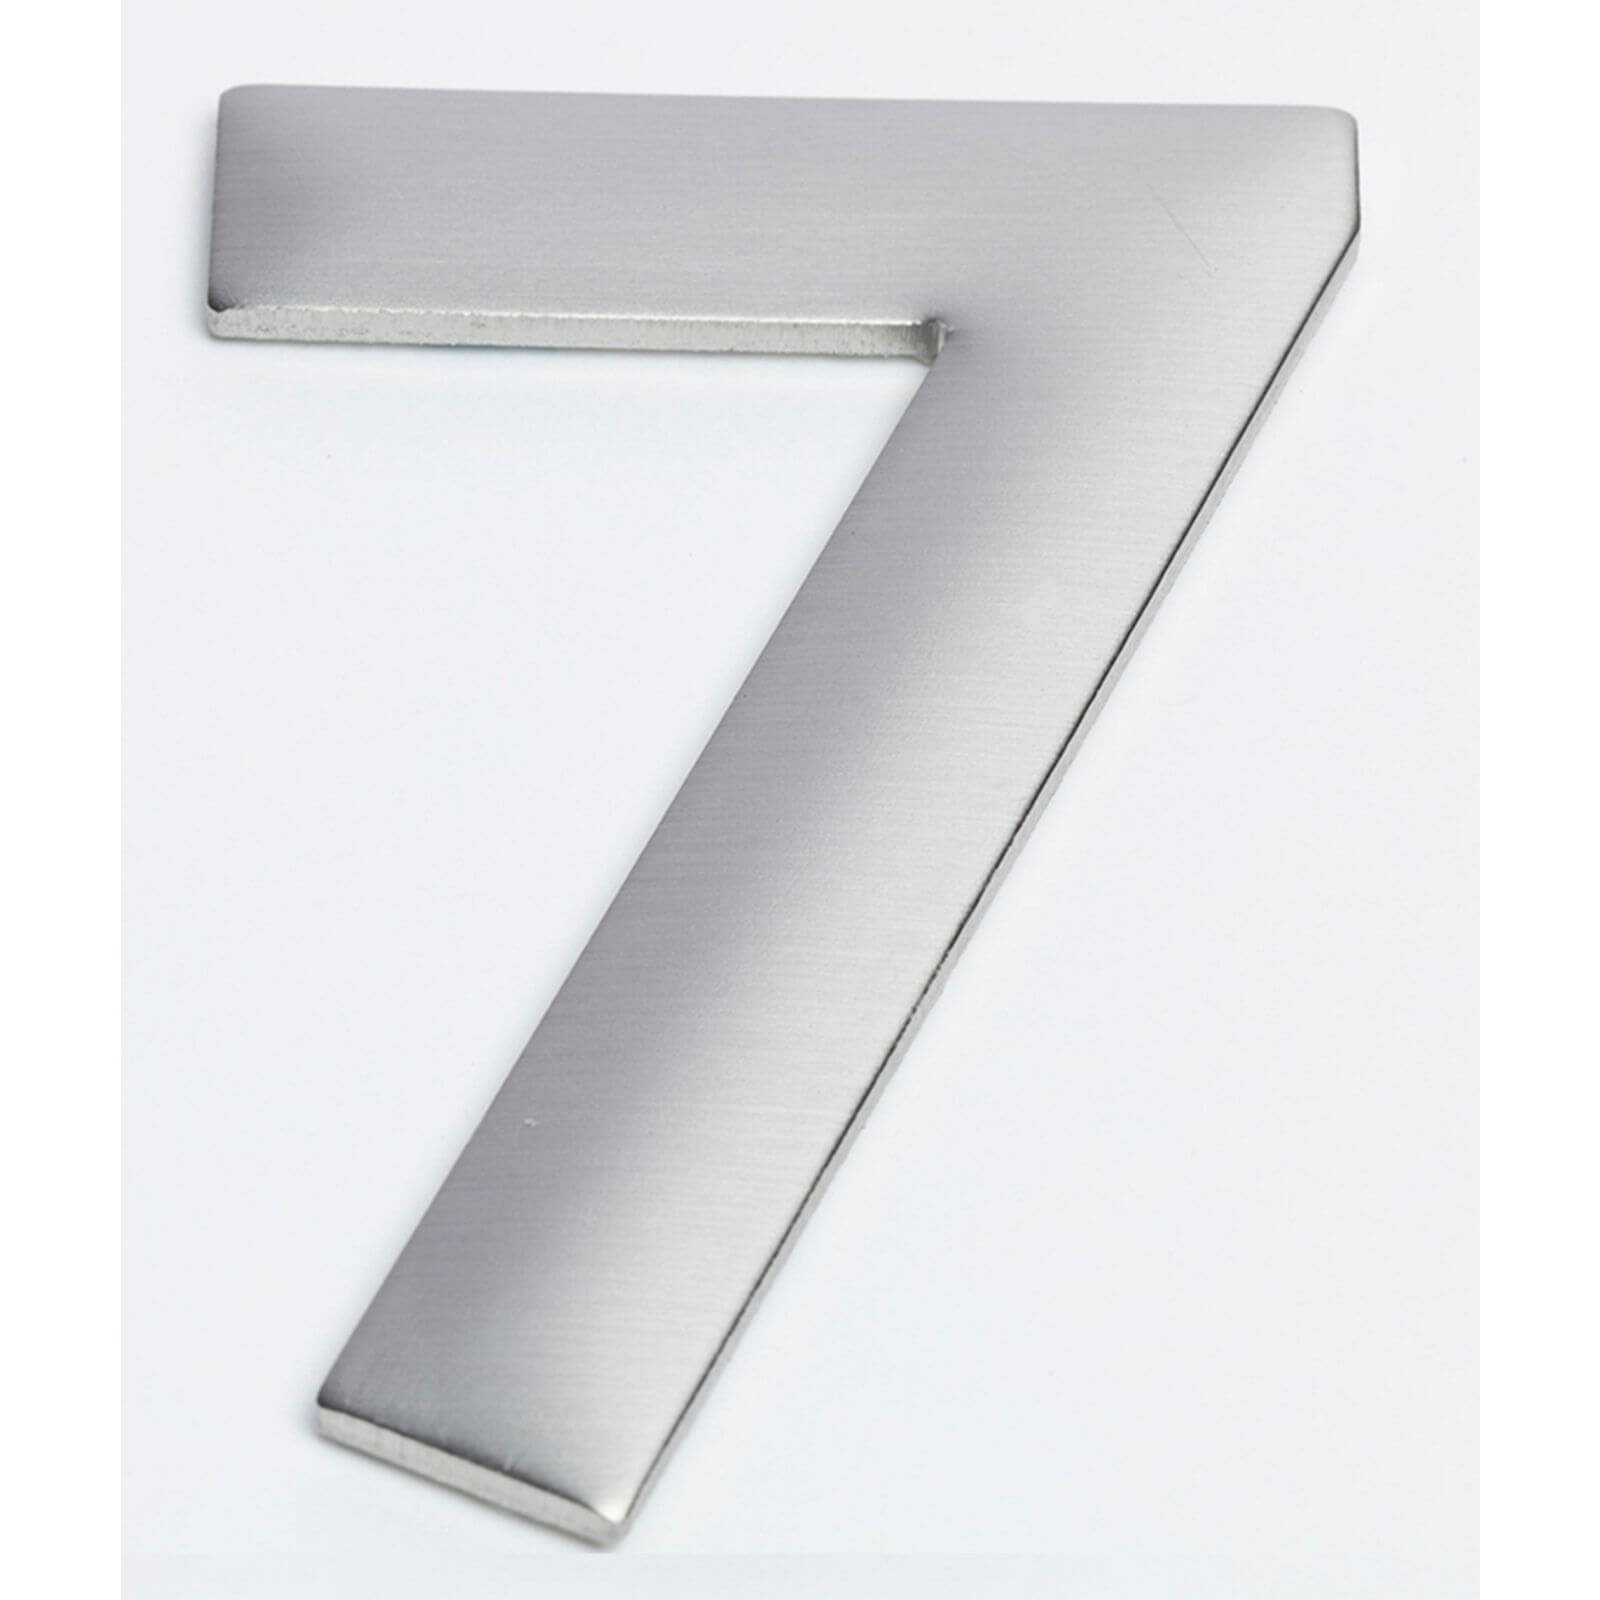 Photo of Suburban Self Adhesive House Number - 75mm - 7